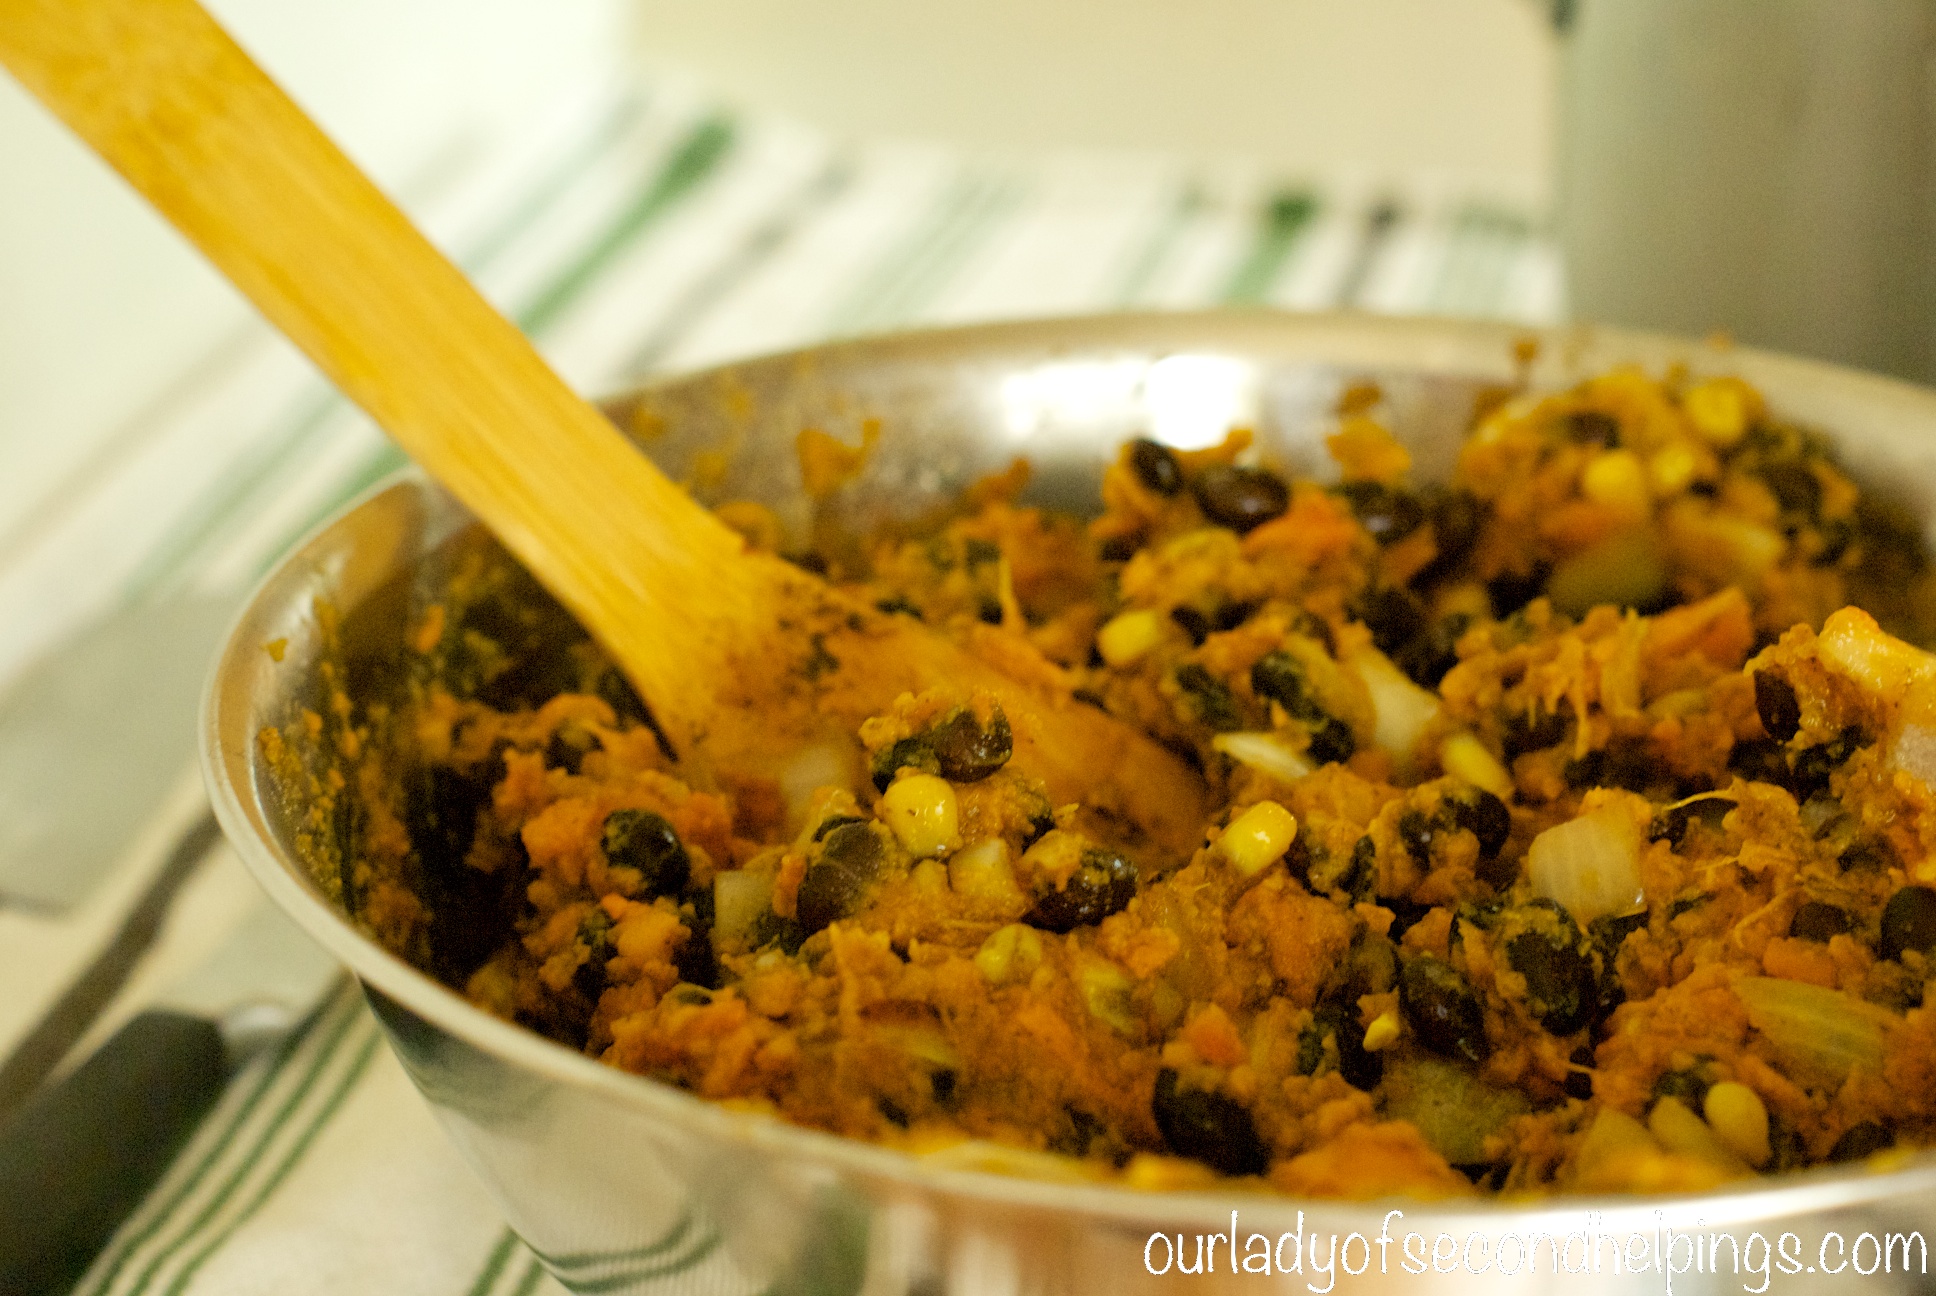 Mixture of sweet potato, beans, corn, and spices